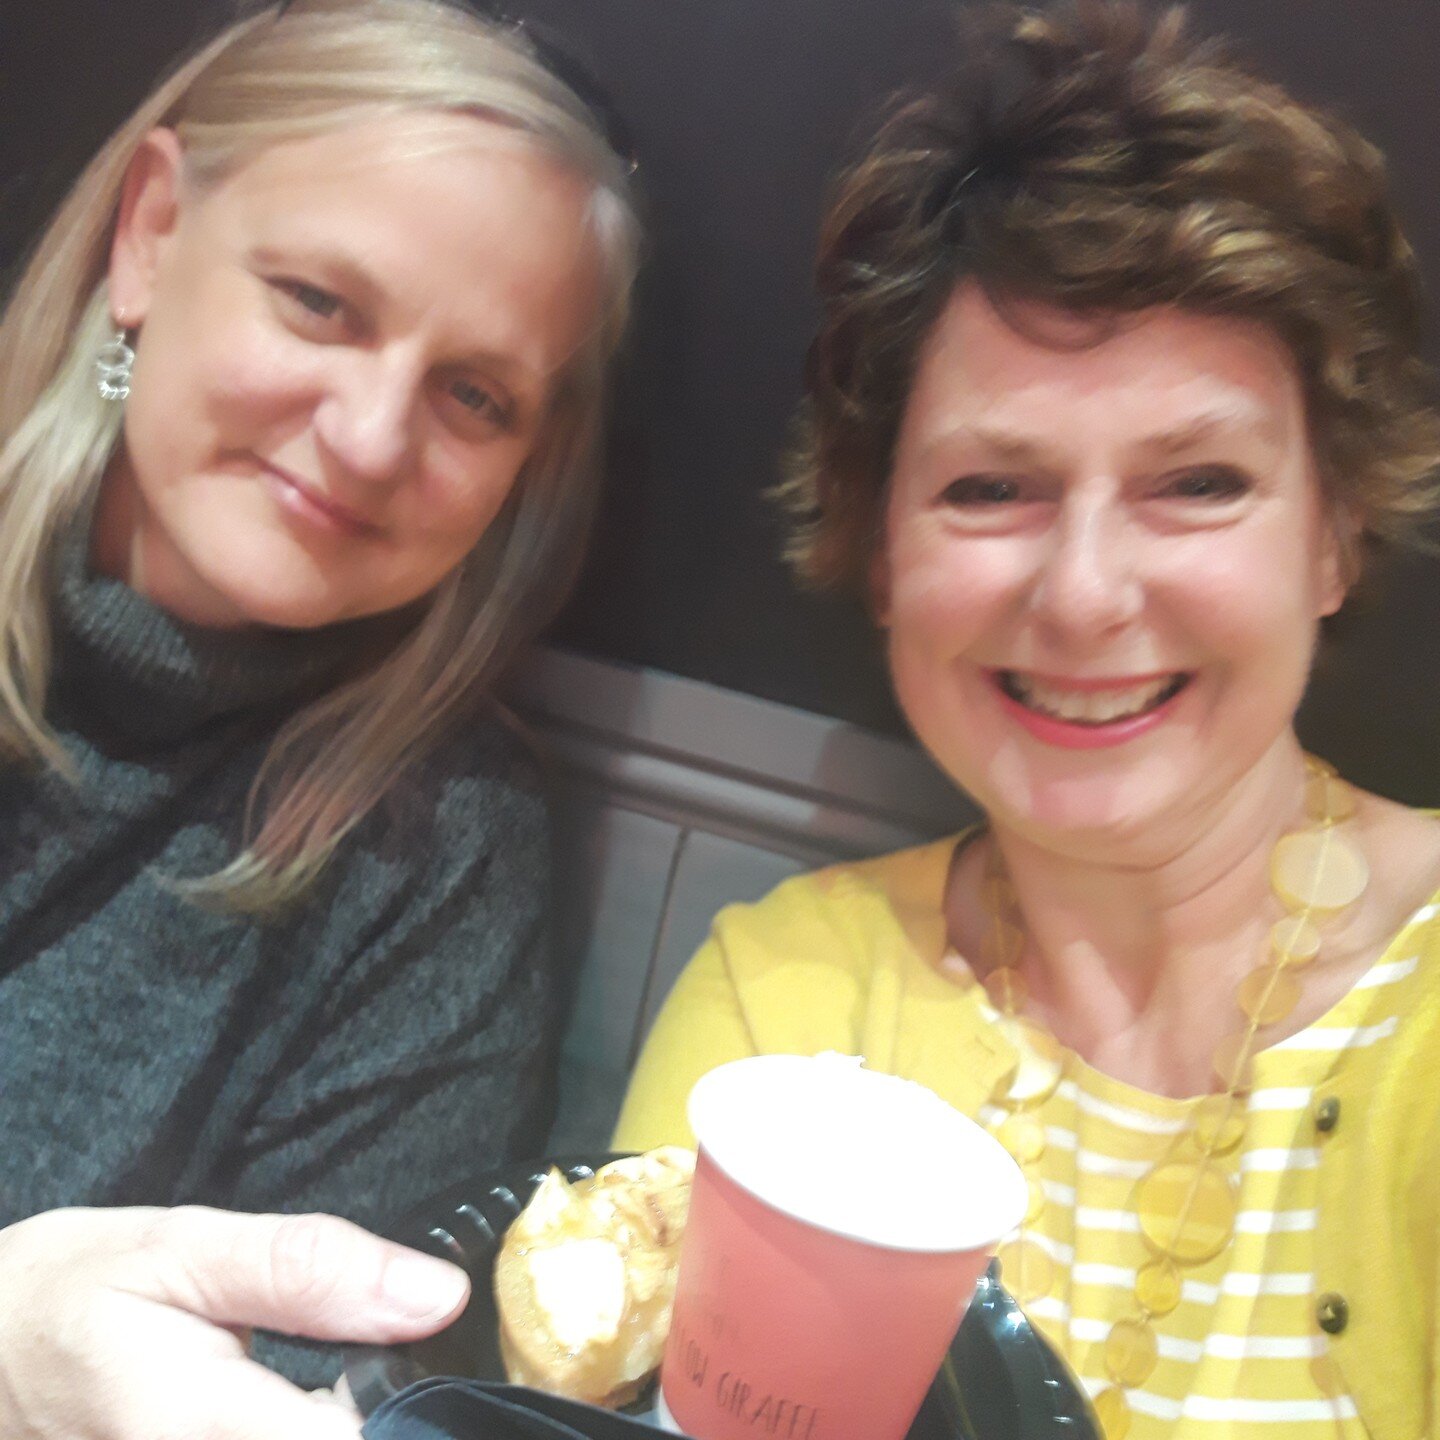 Delish coffee and cake with @eastkentgirl who has been helping me with my new website

#cakelovers #goodfriendsgoodtimes #dealkent